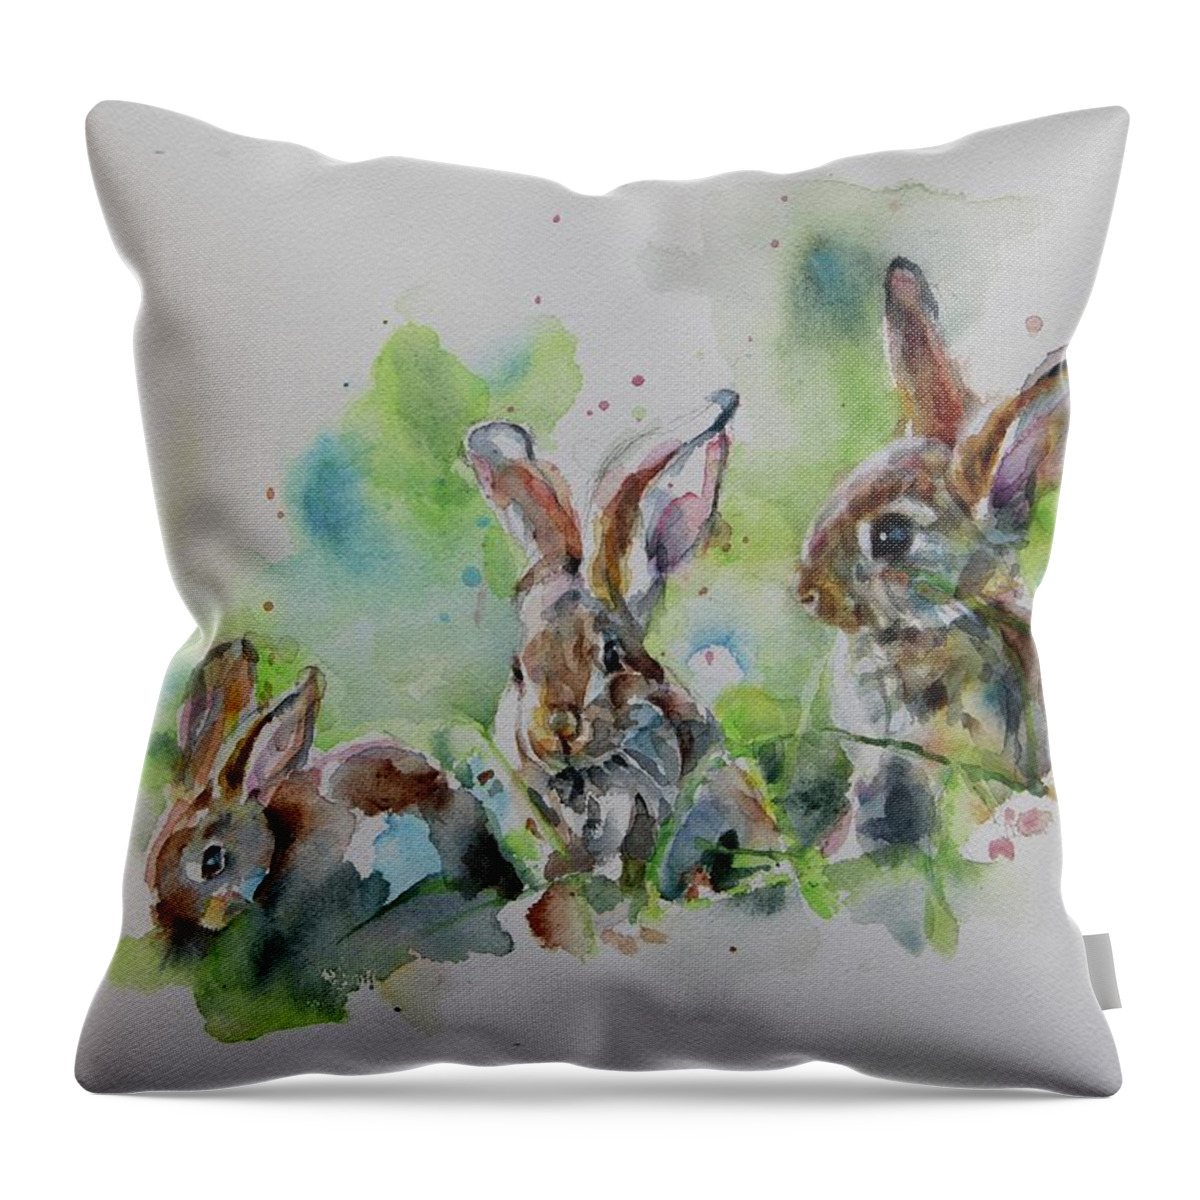 Watercolor Throw Pillow featuring the painting In the Meadow by Tracy Male